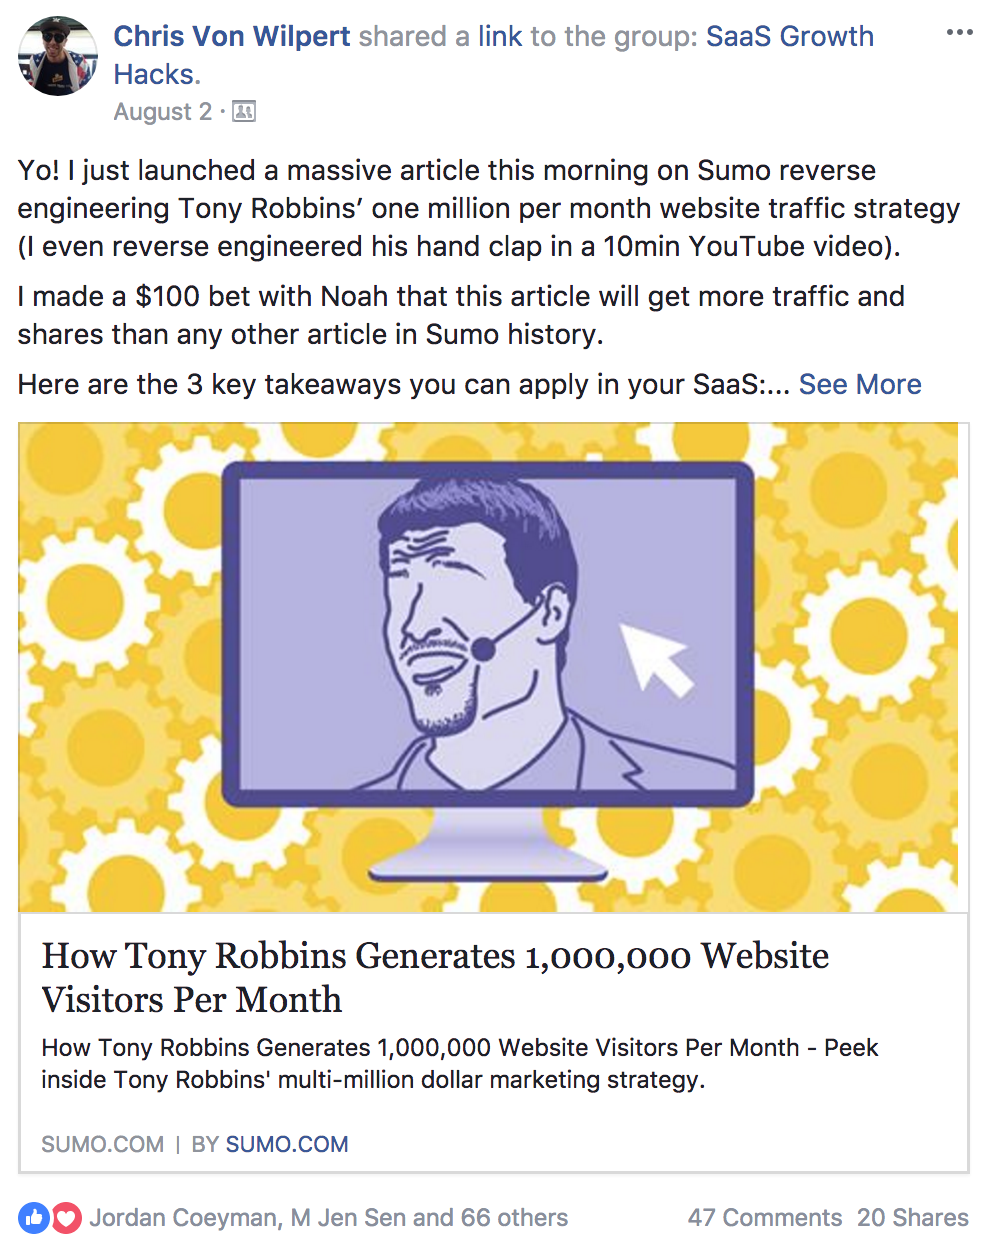 Screenshot showing a content promotion post on Facebook by Sumo